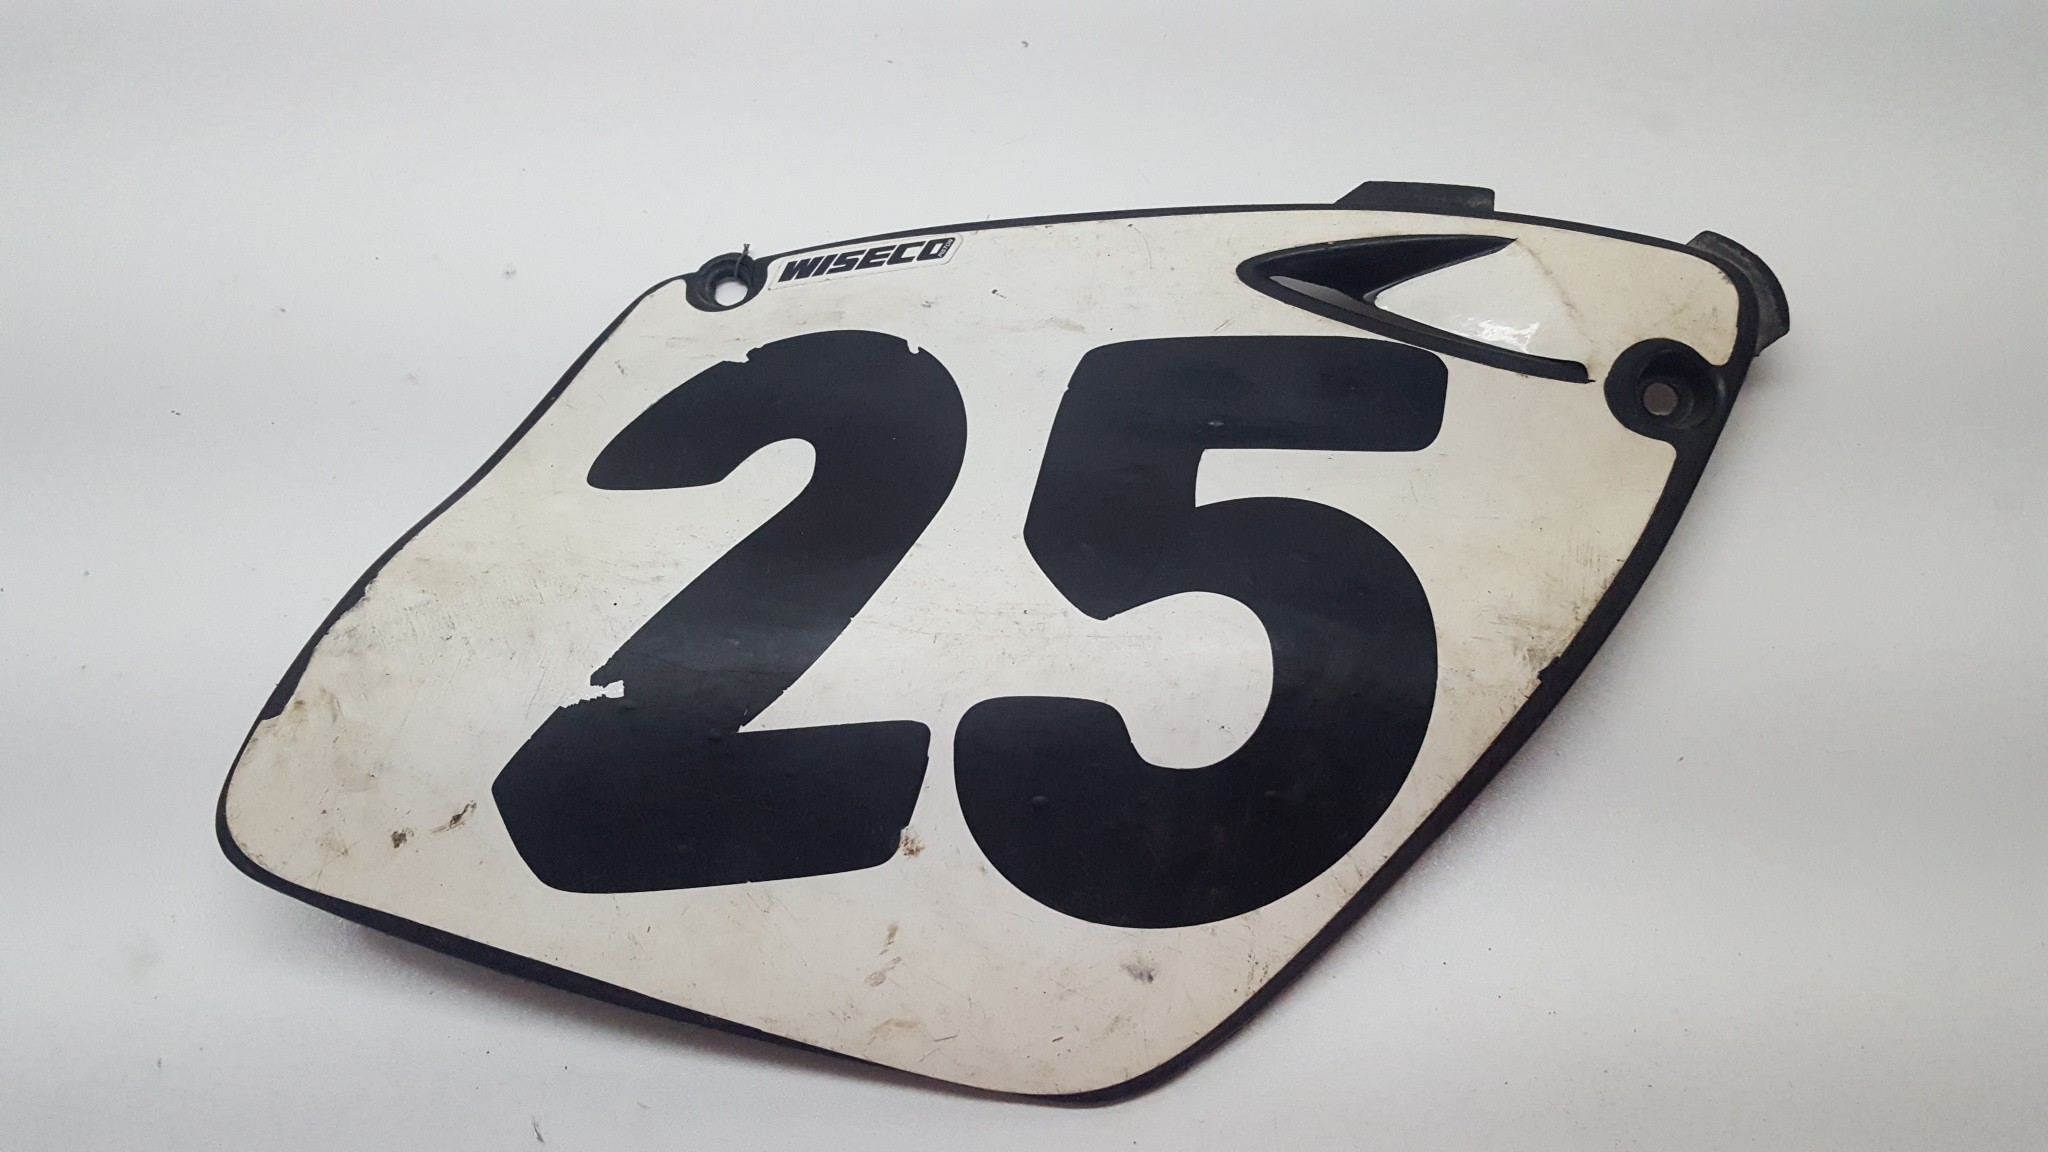 Right Side Cover Number Plate KTM SX EXC 125 200 250 300 380 400 520 SX 98-01 rear black/white